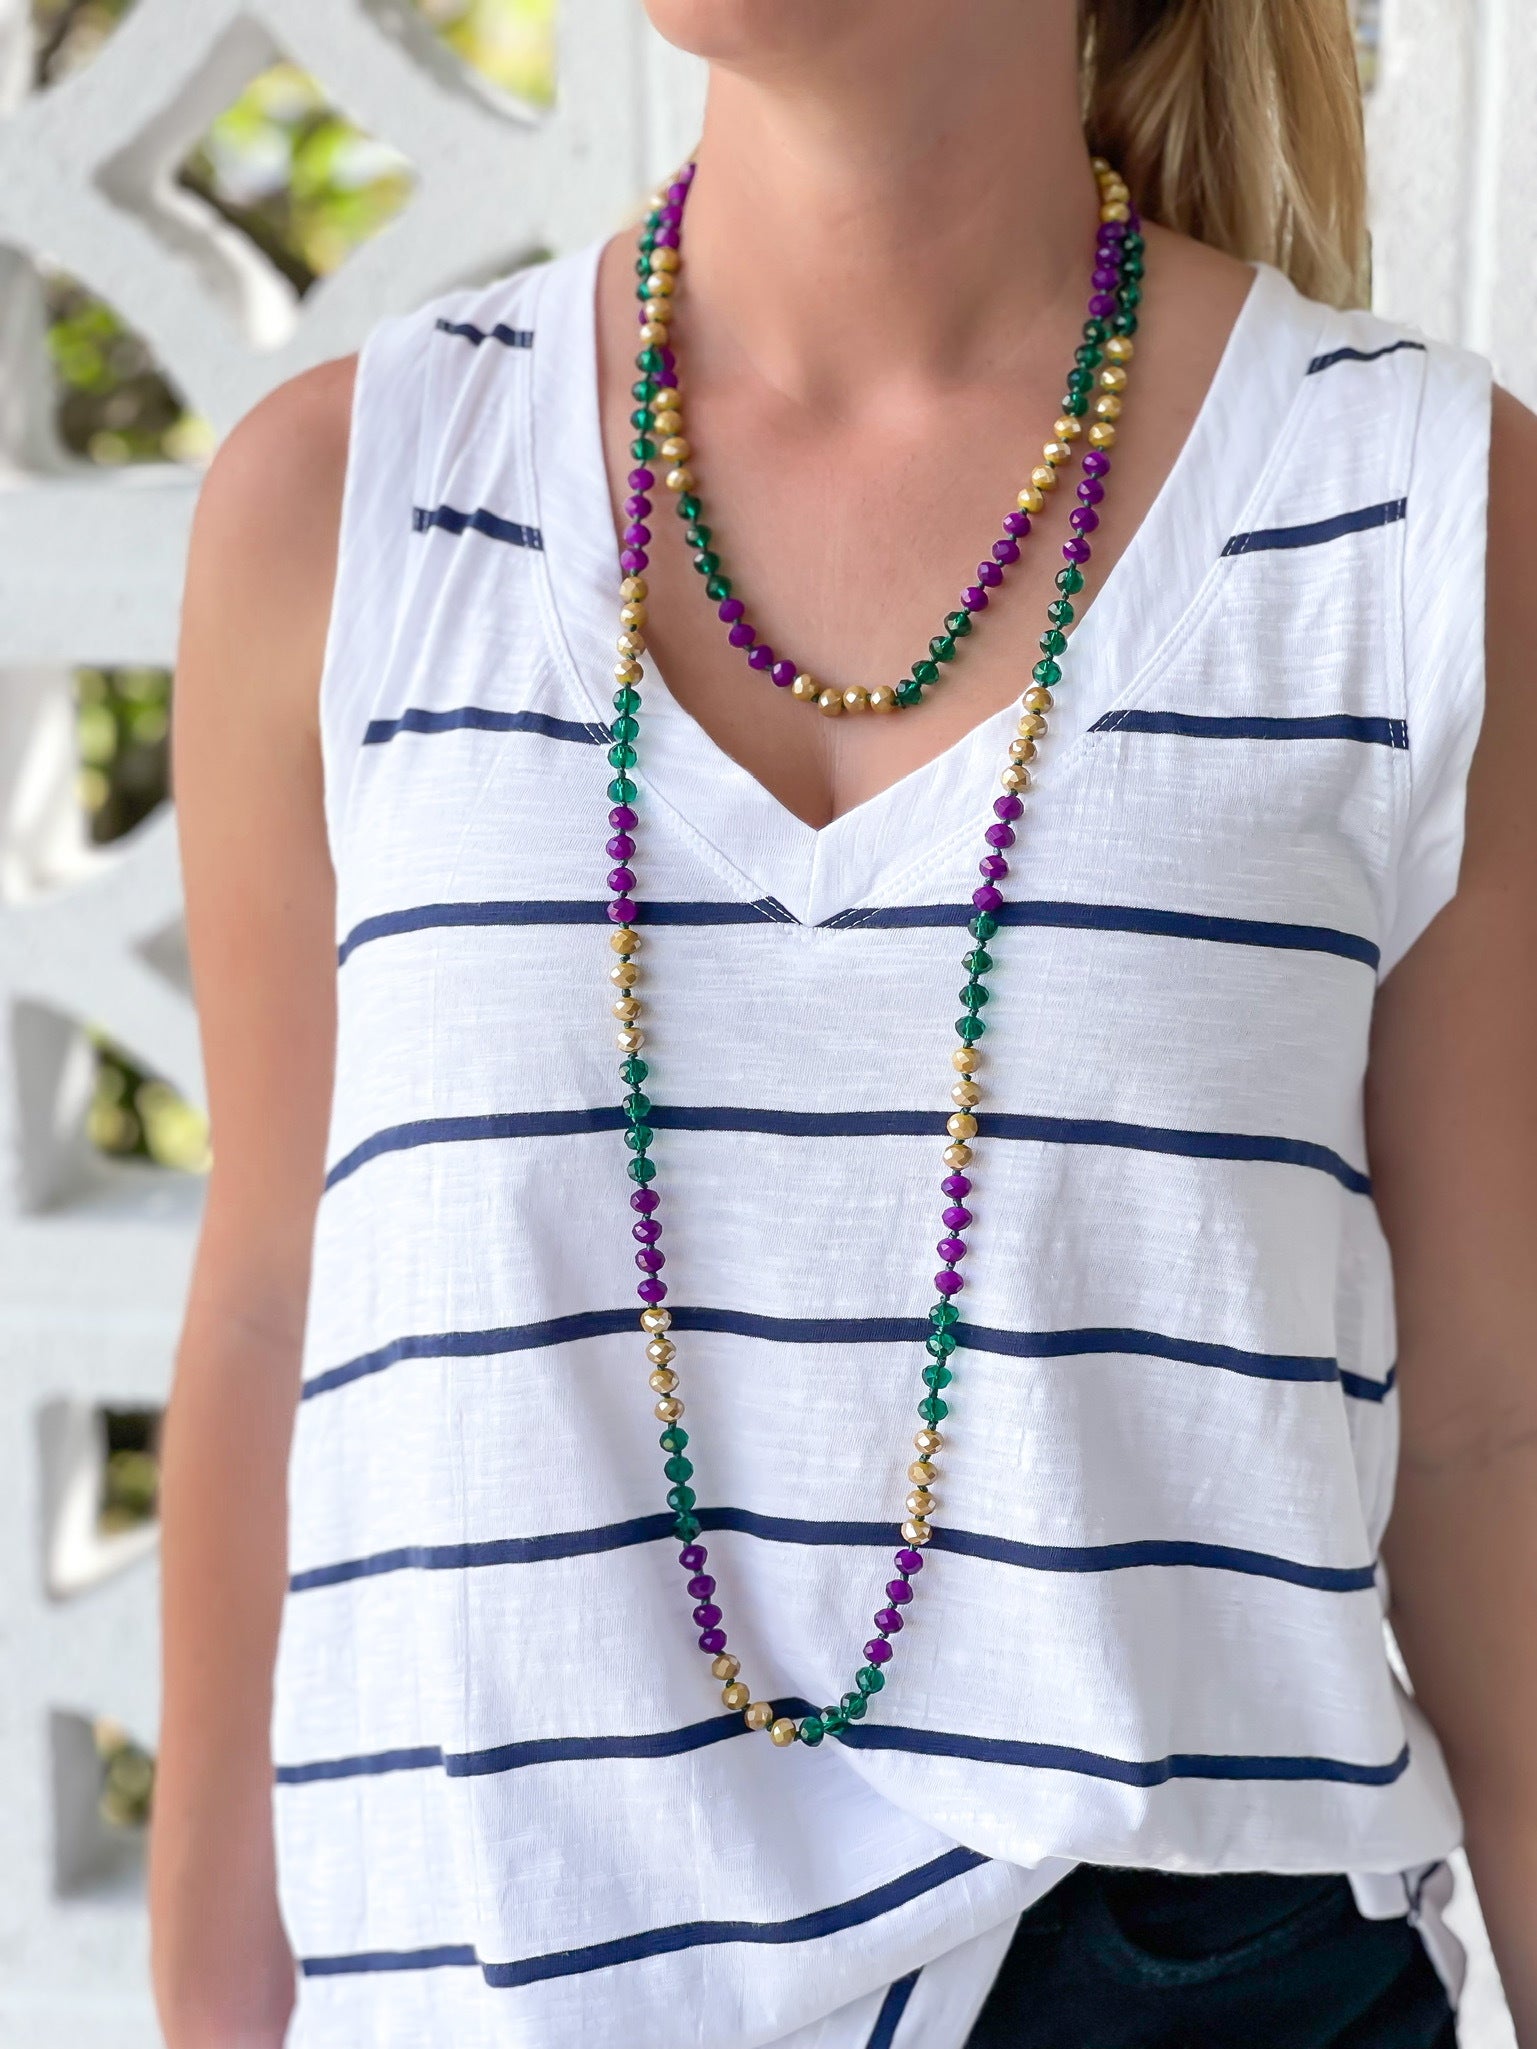 Endless Beaded Long Necklace - Purple, Gold & Green